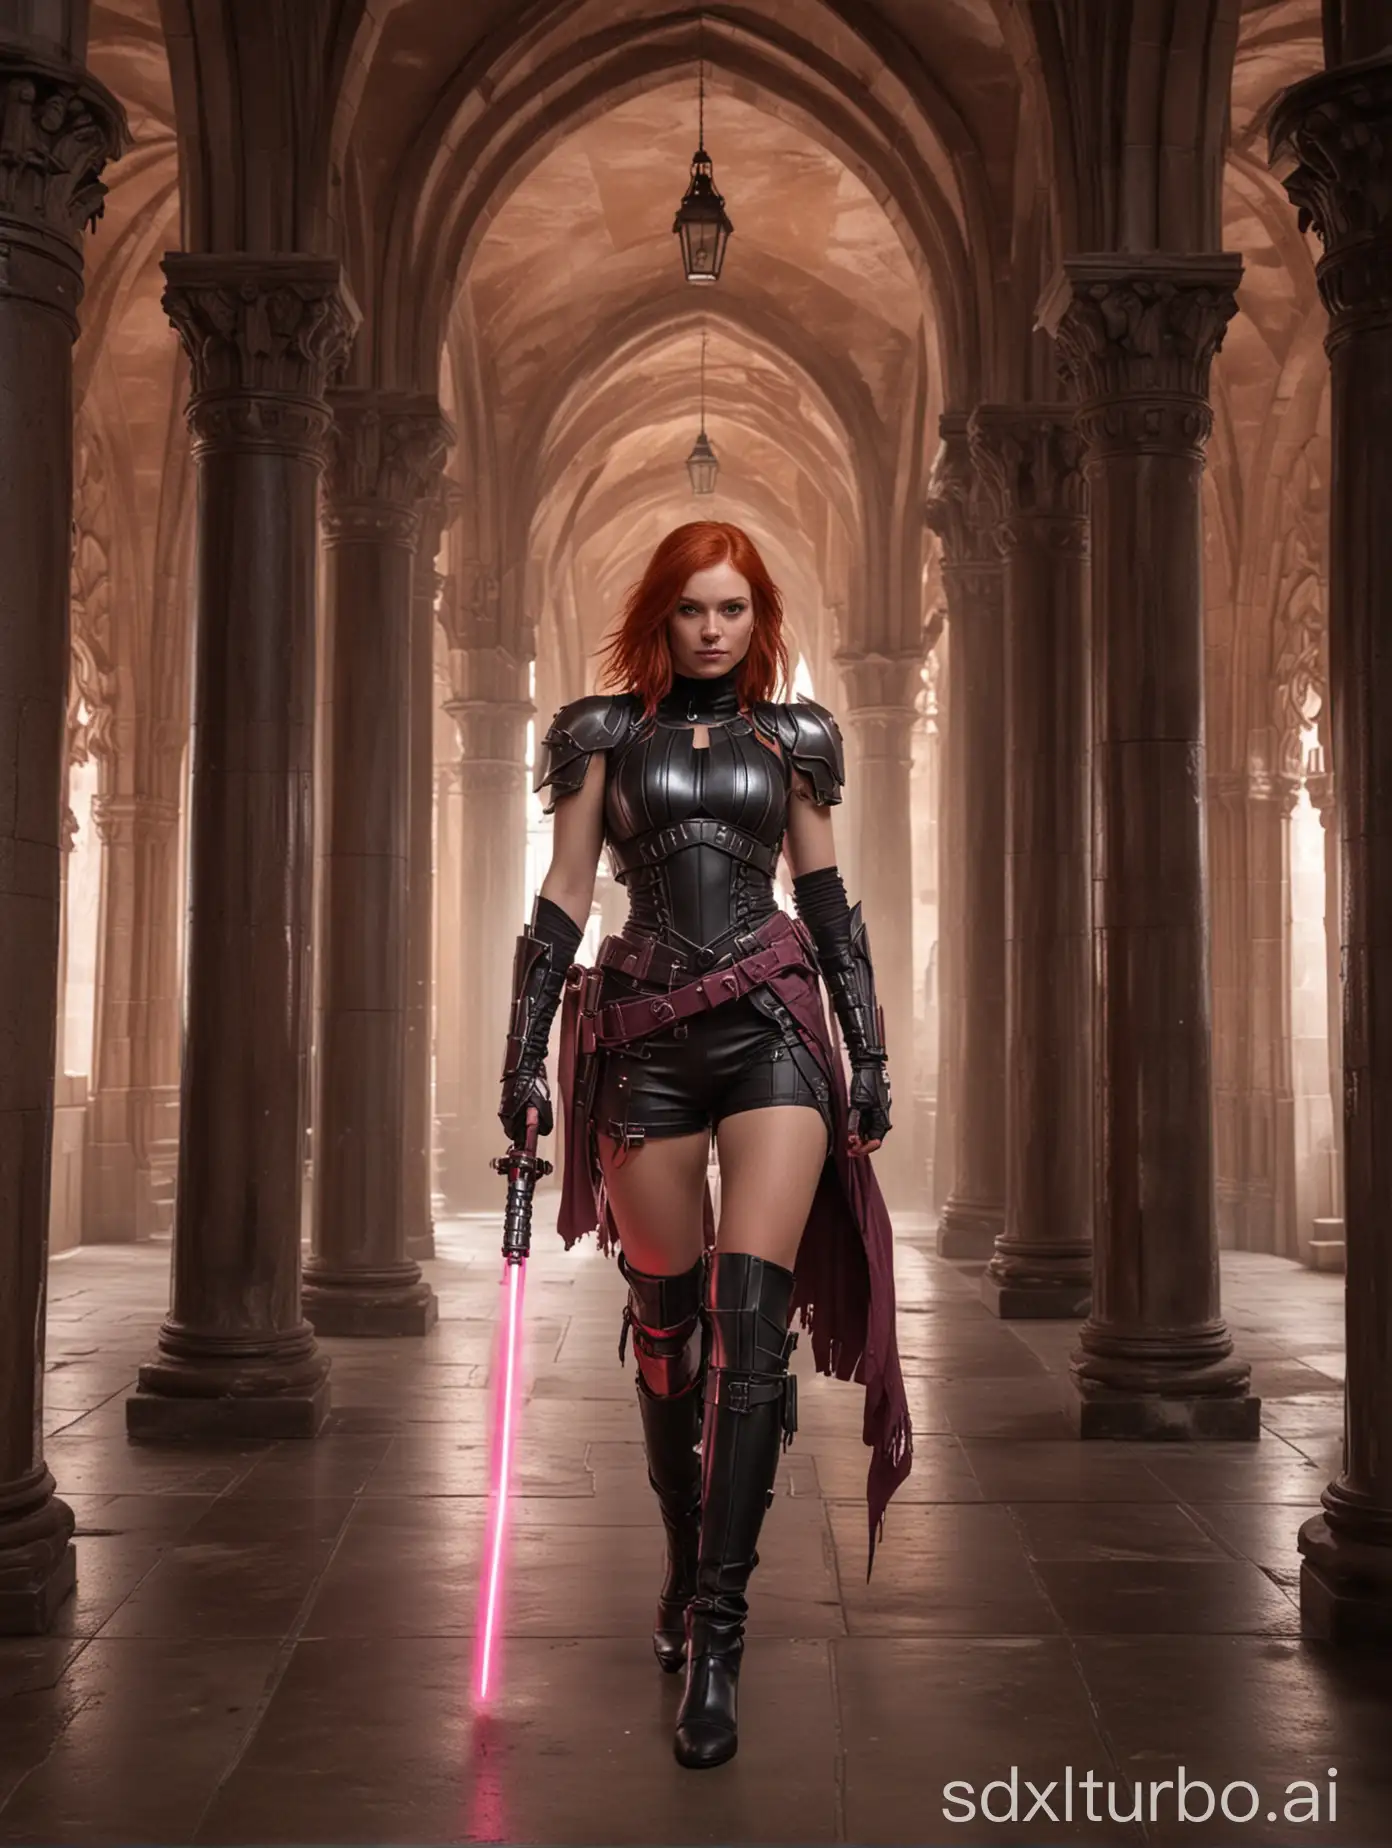 RedHaired-Woman-in-Gothic-Armor-Wielding-Pink-Lightsaber-in-Hallway